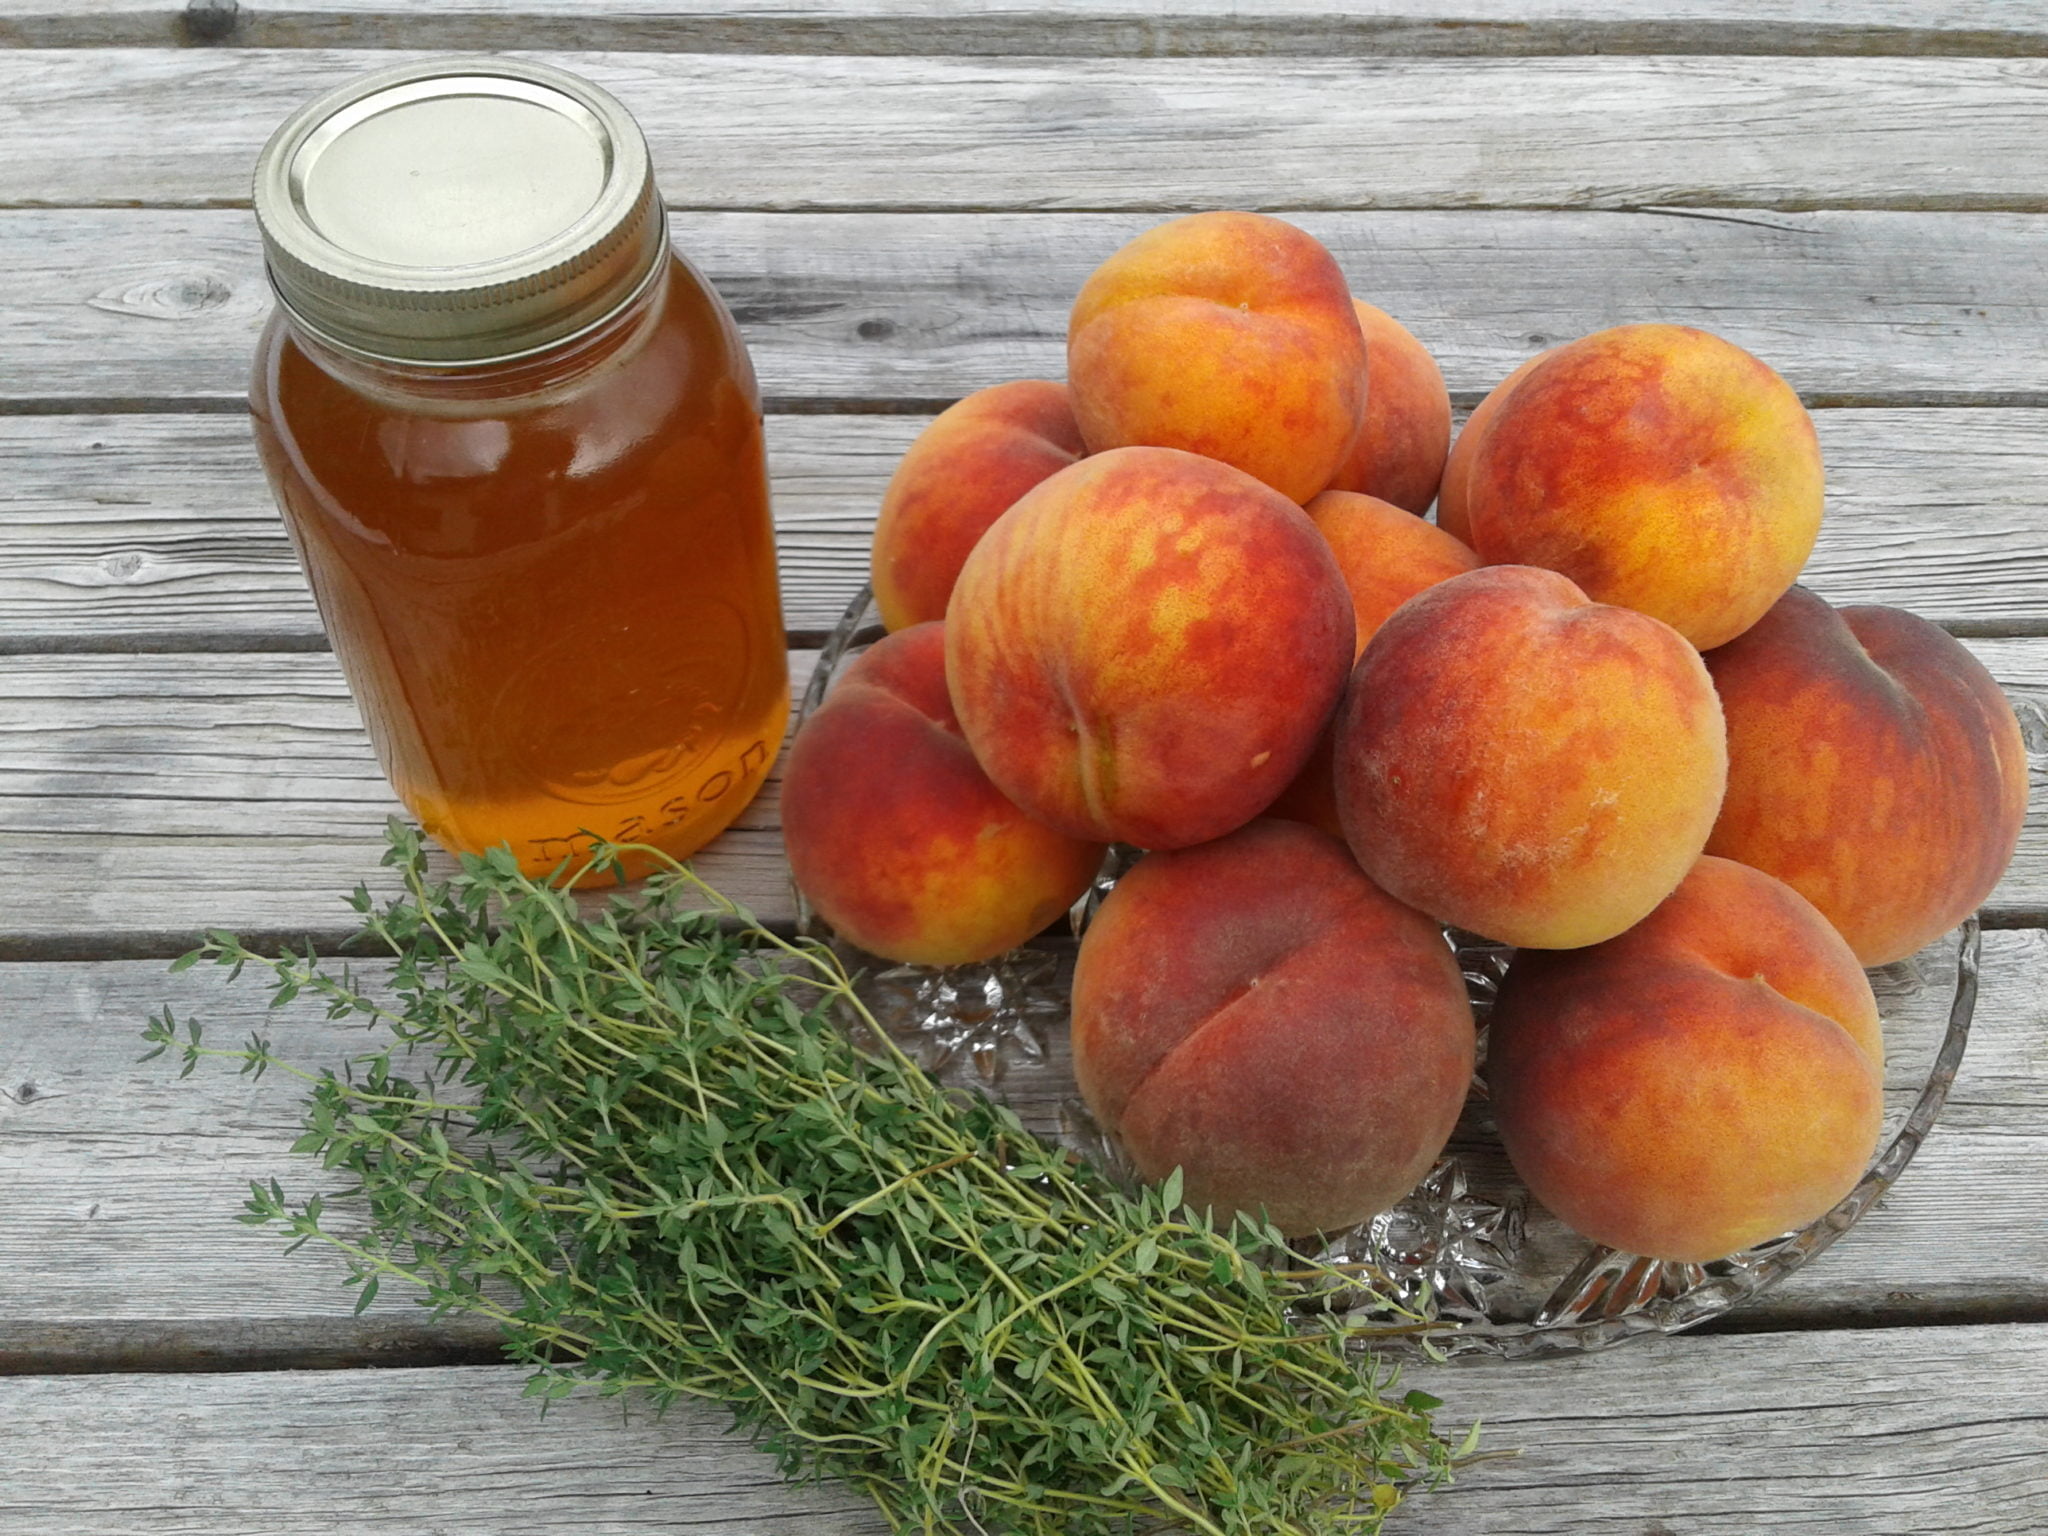 Broiled Glohaven Peaches with Thymed Honey